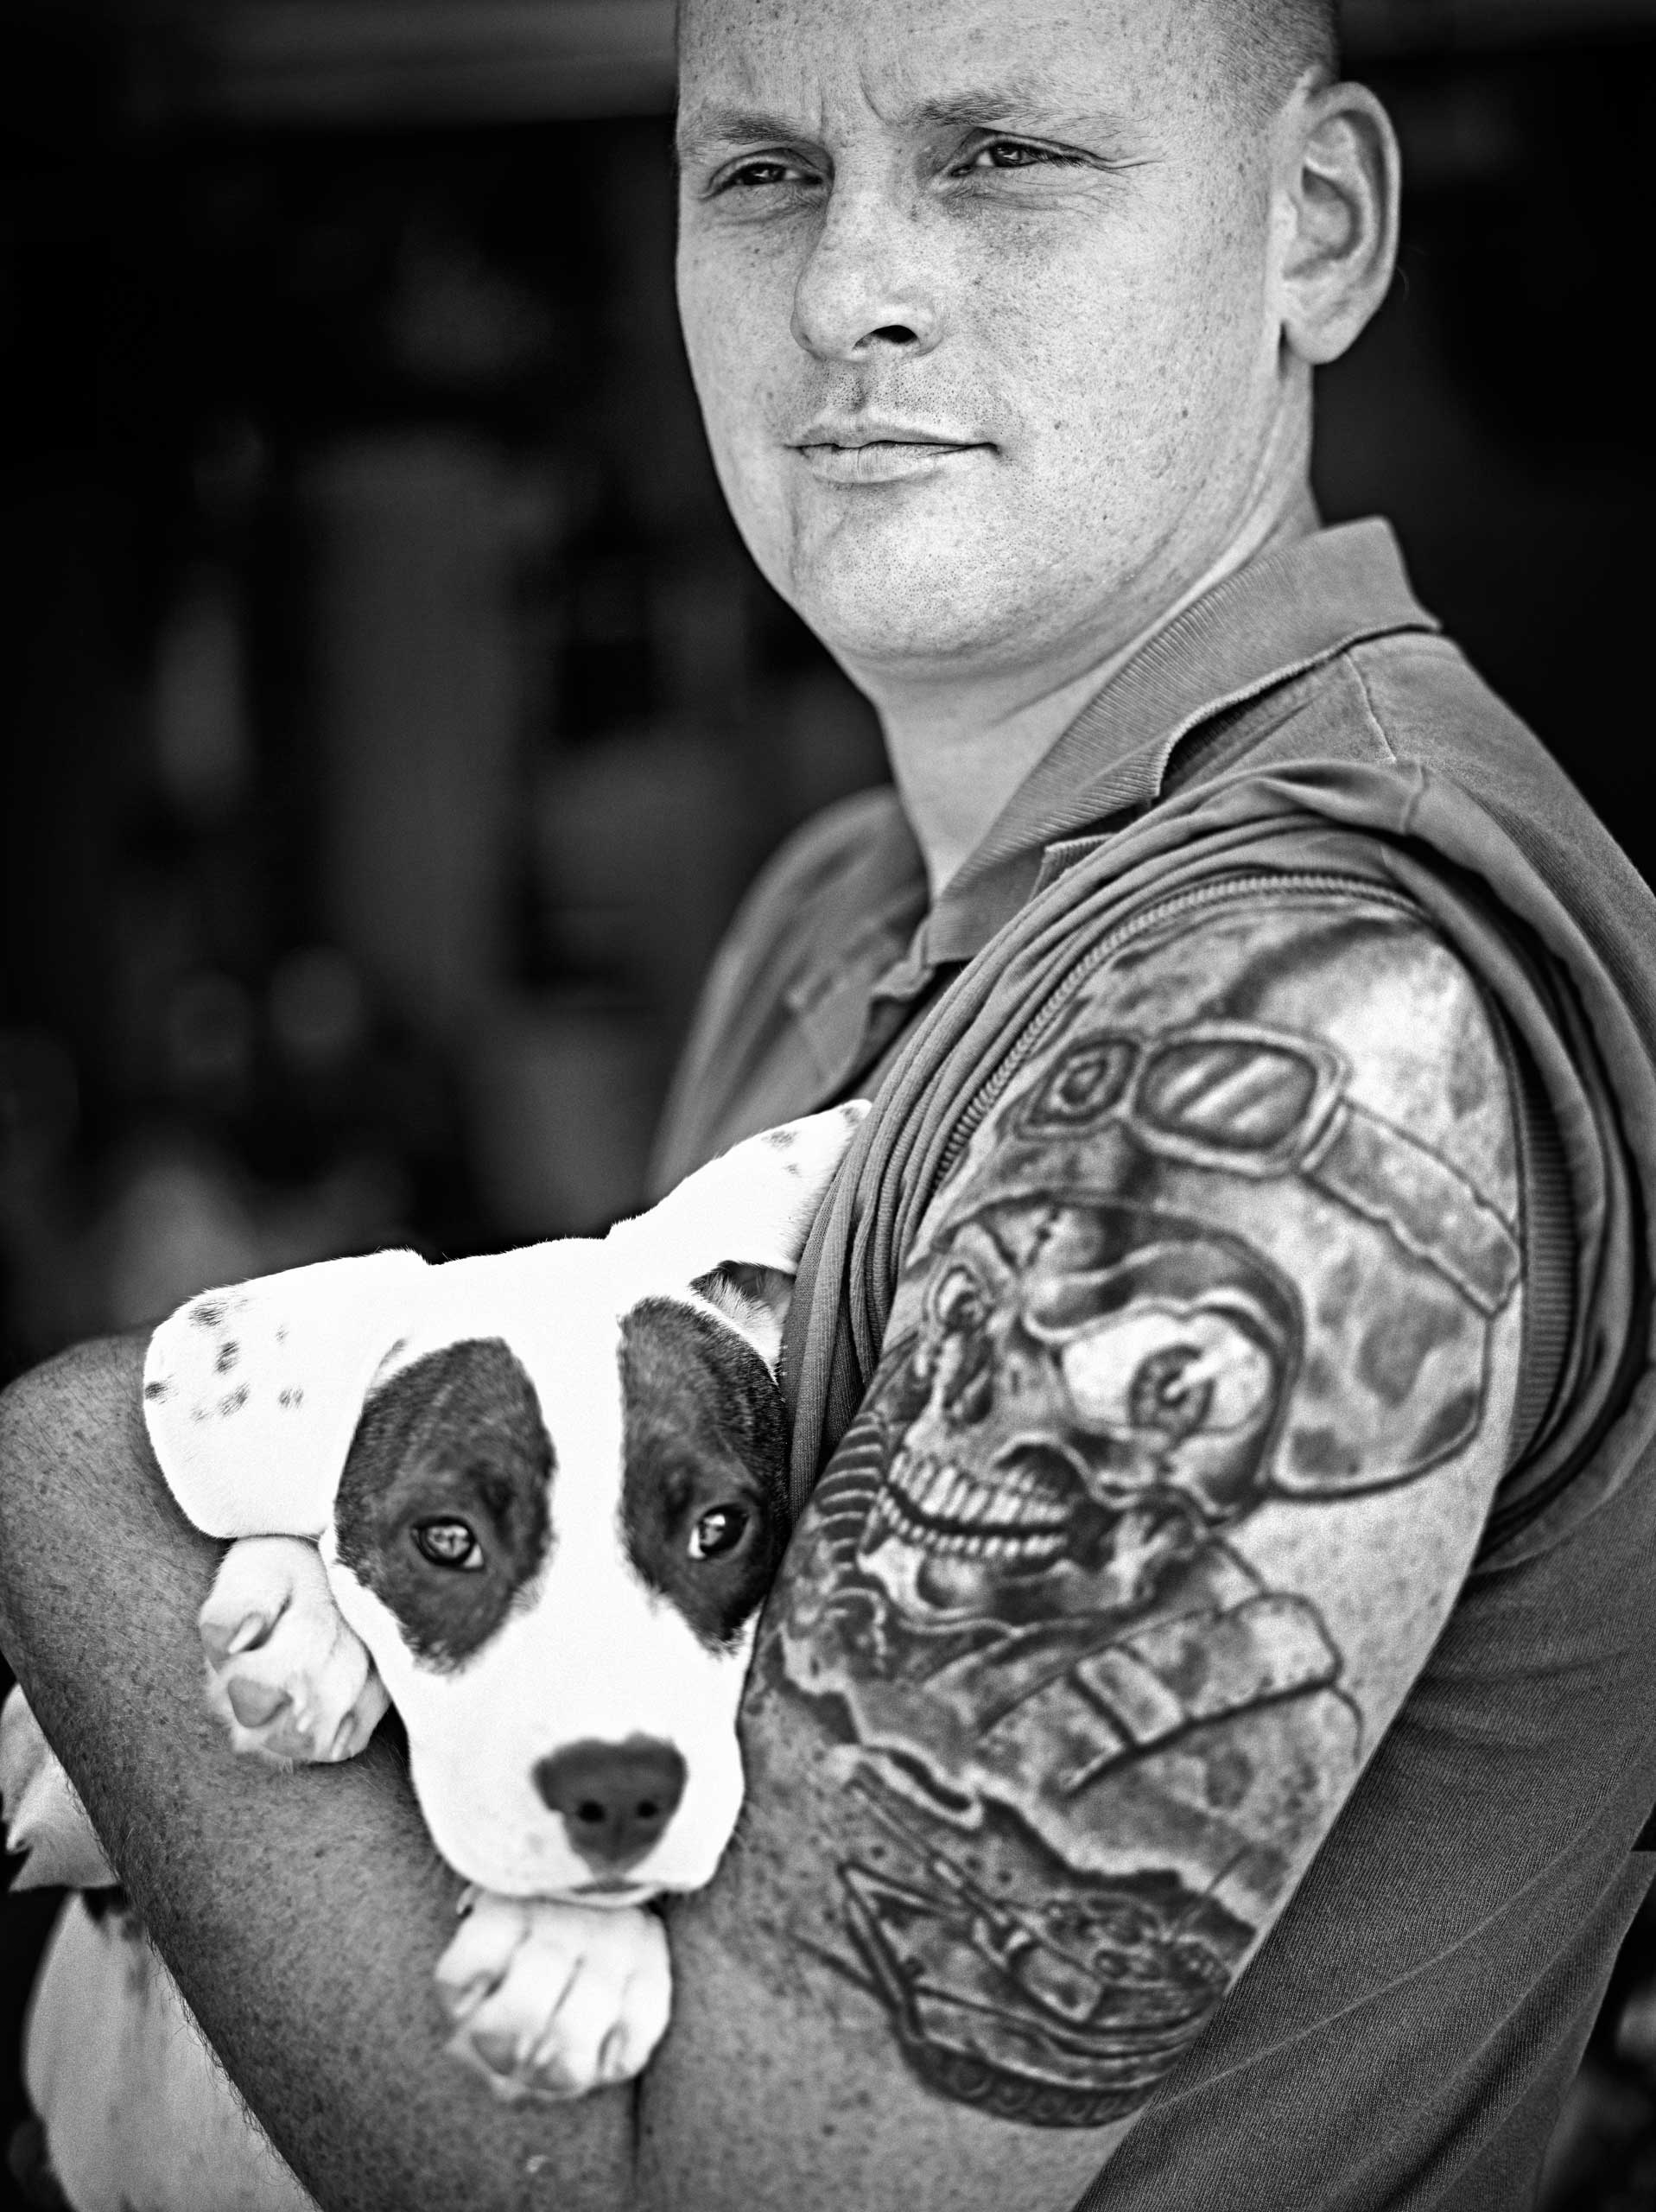 US Army Veteran Steve Moore poses for a photograph with Snickers, a young puppy he adopted, in front of his home in Santa Rosa, California, United States on September 30, 2014.
                              
                              Moore served in the US Army for four and a half years and did two tours in Iraq with Dragon Company, 1st Squadron, 3rd Armored Cavalry Regiment.